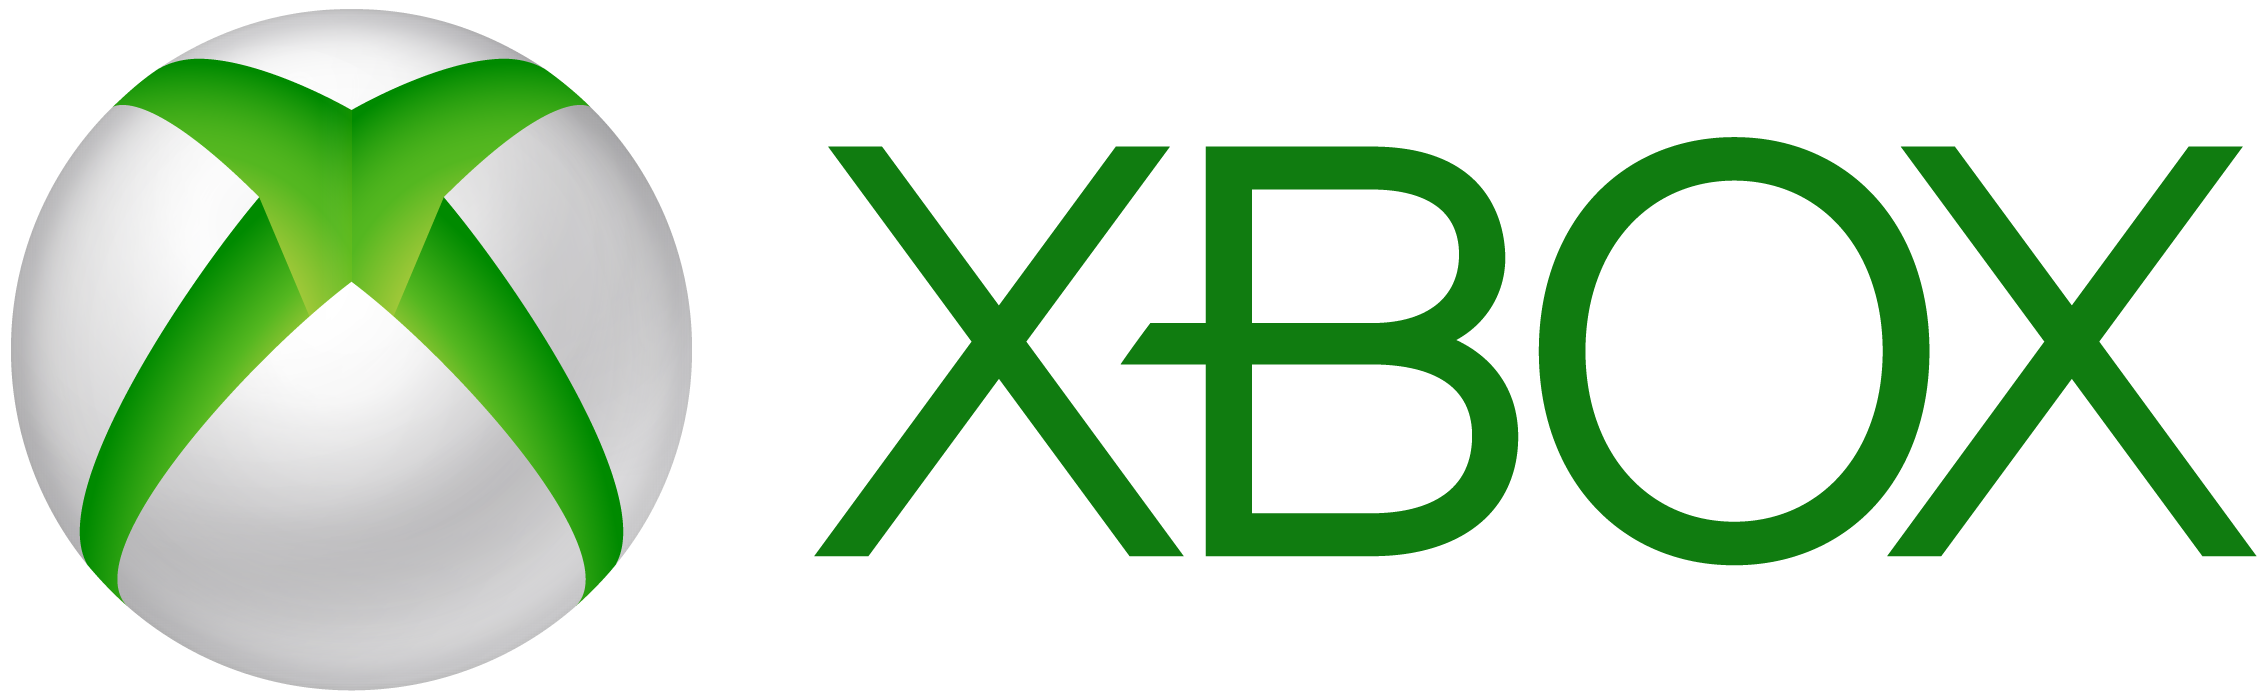 Playstation Text One Xbox Grass Free Download Image PNG Image